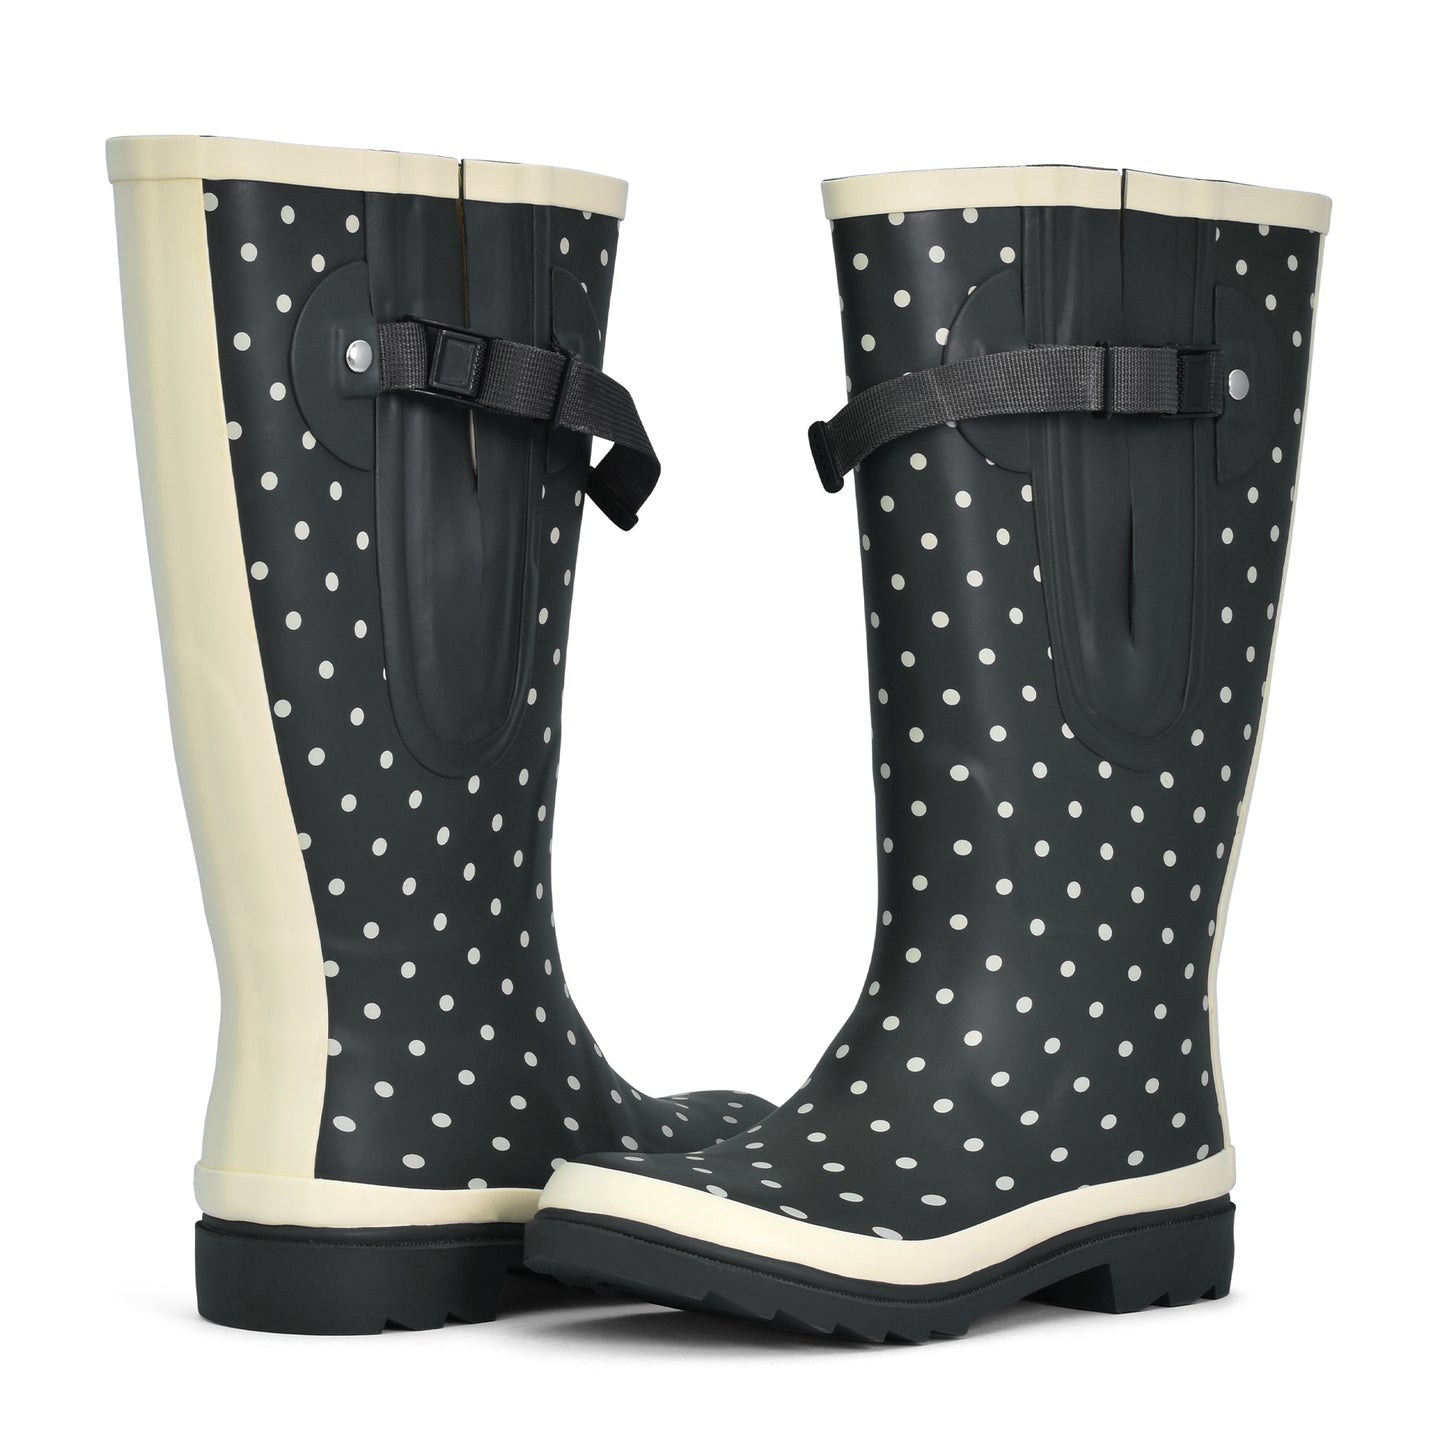 grey wide calf wellies with spots